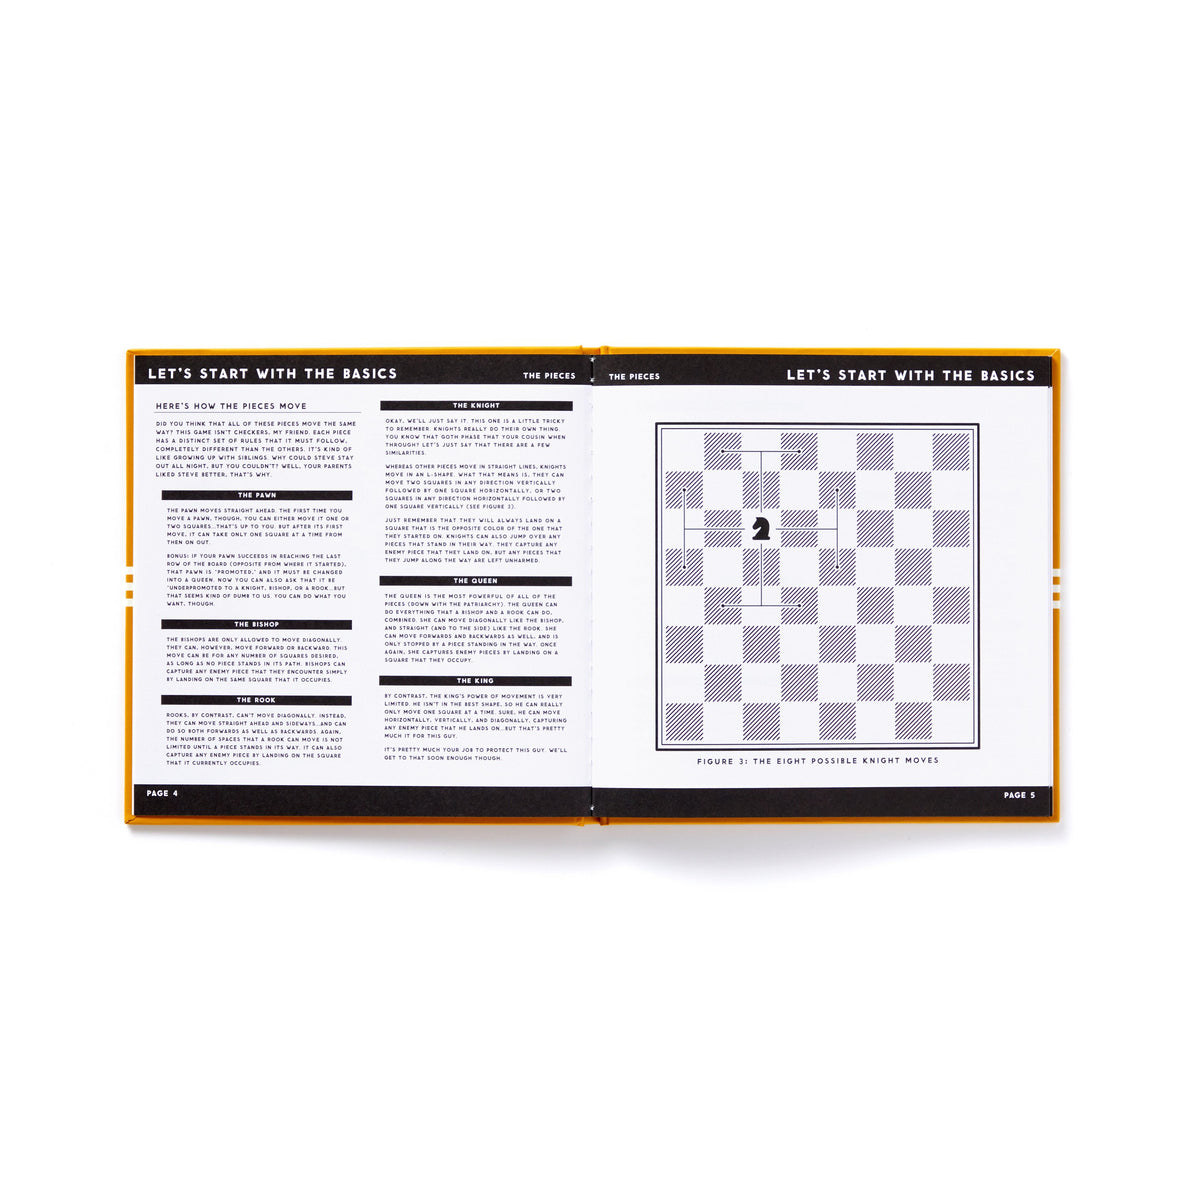 Learn To Make This One-Of-A-Kind Chess Board 